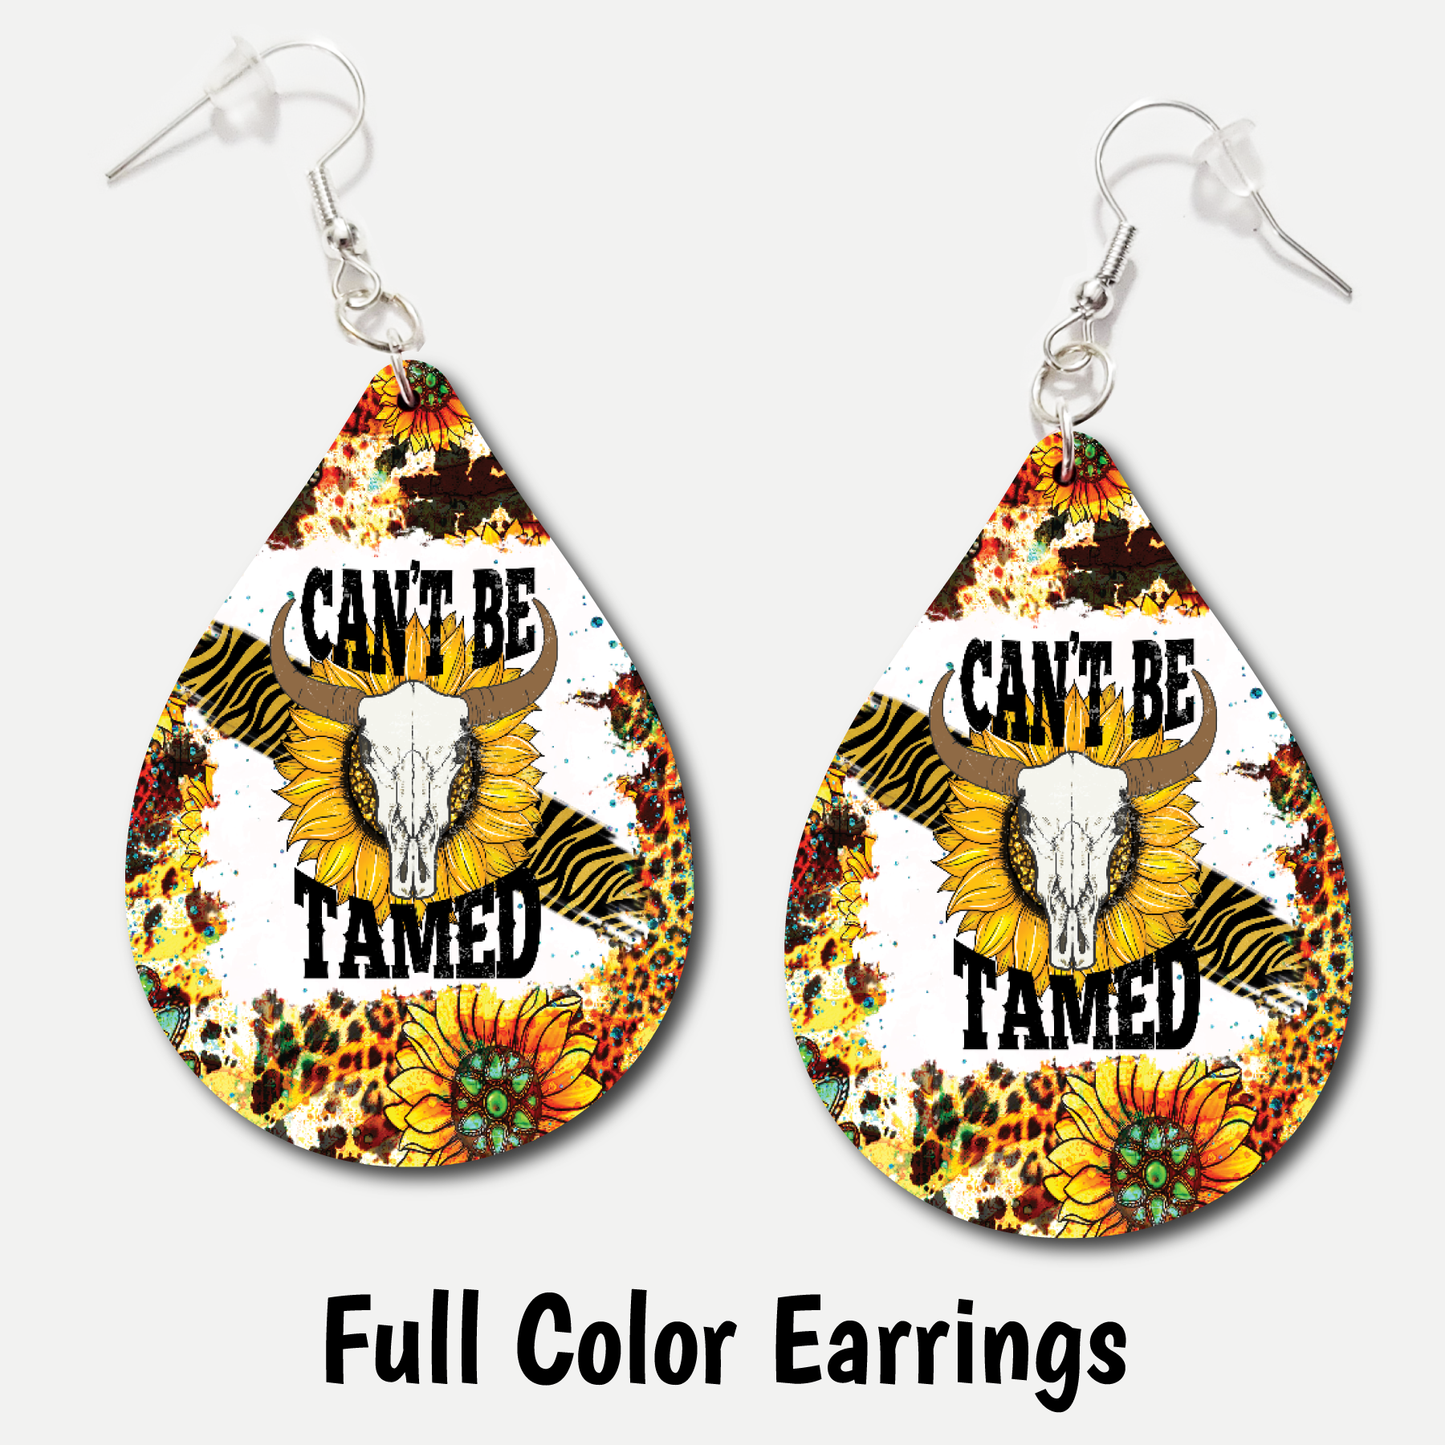 Can't Be Tamed - Full Color Earrings